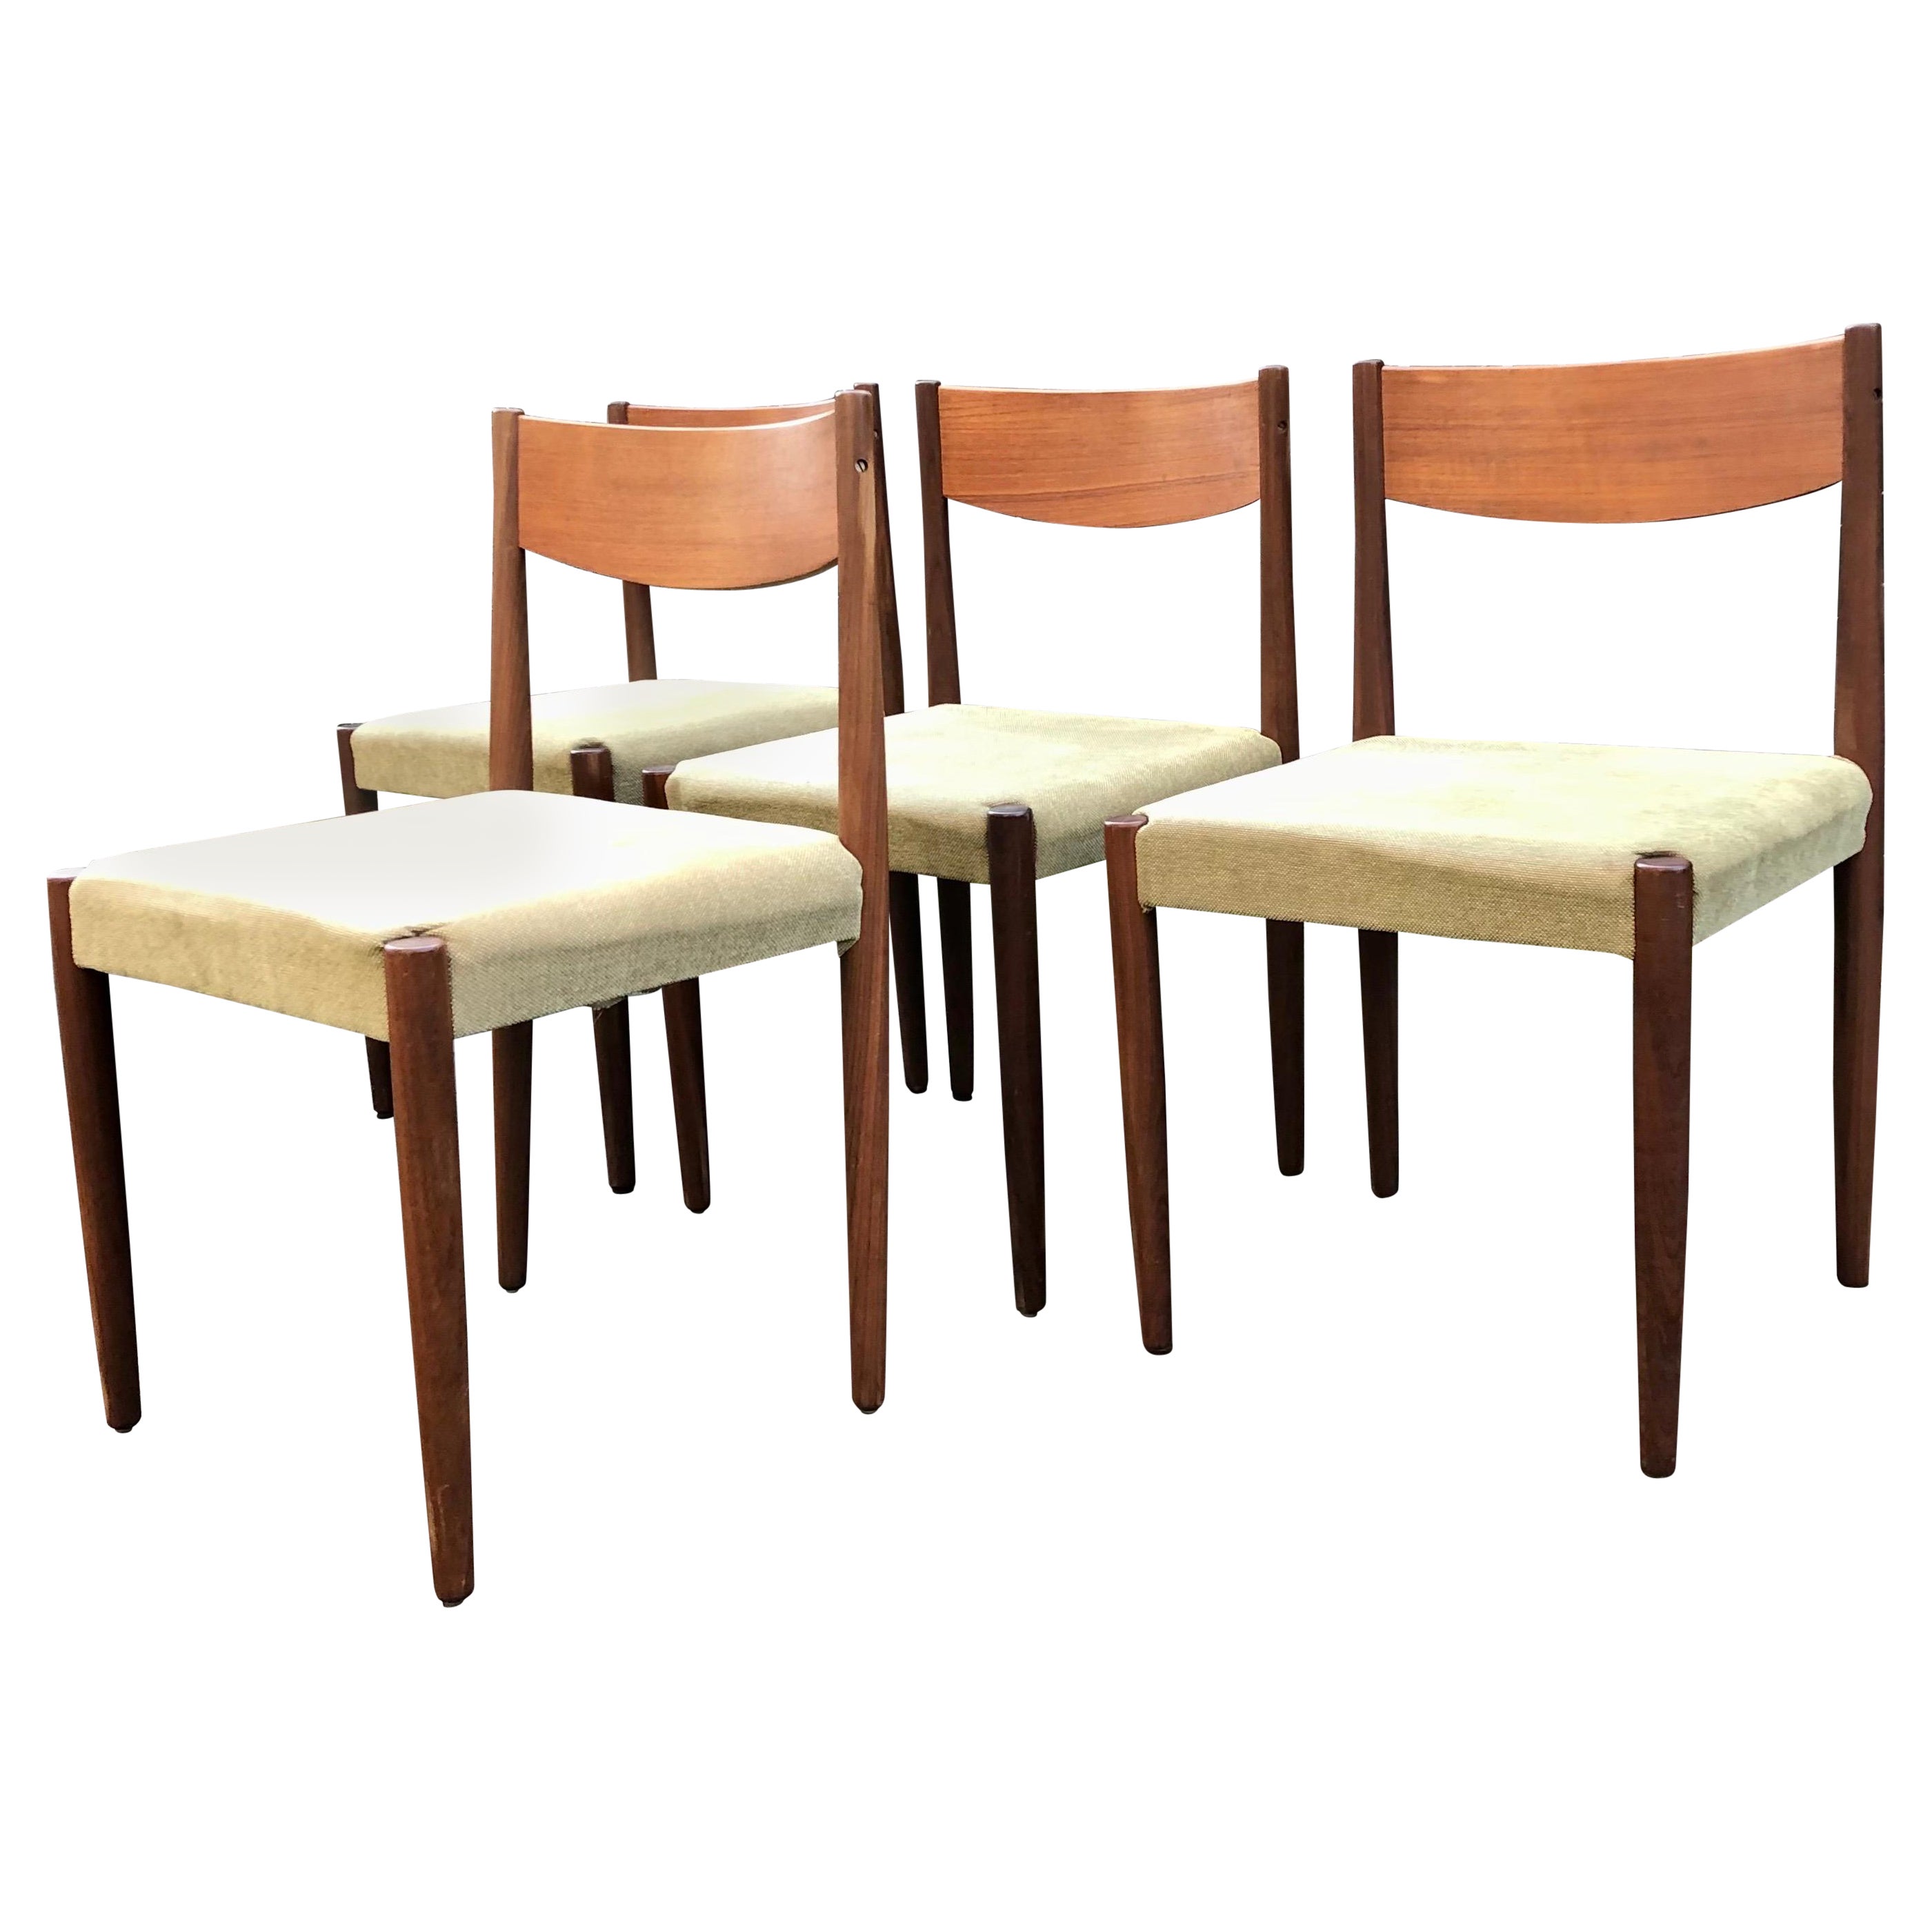 Vintage Danish Modern Teak Dining Chair Set by Poul Volther